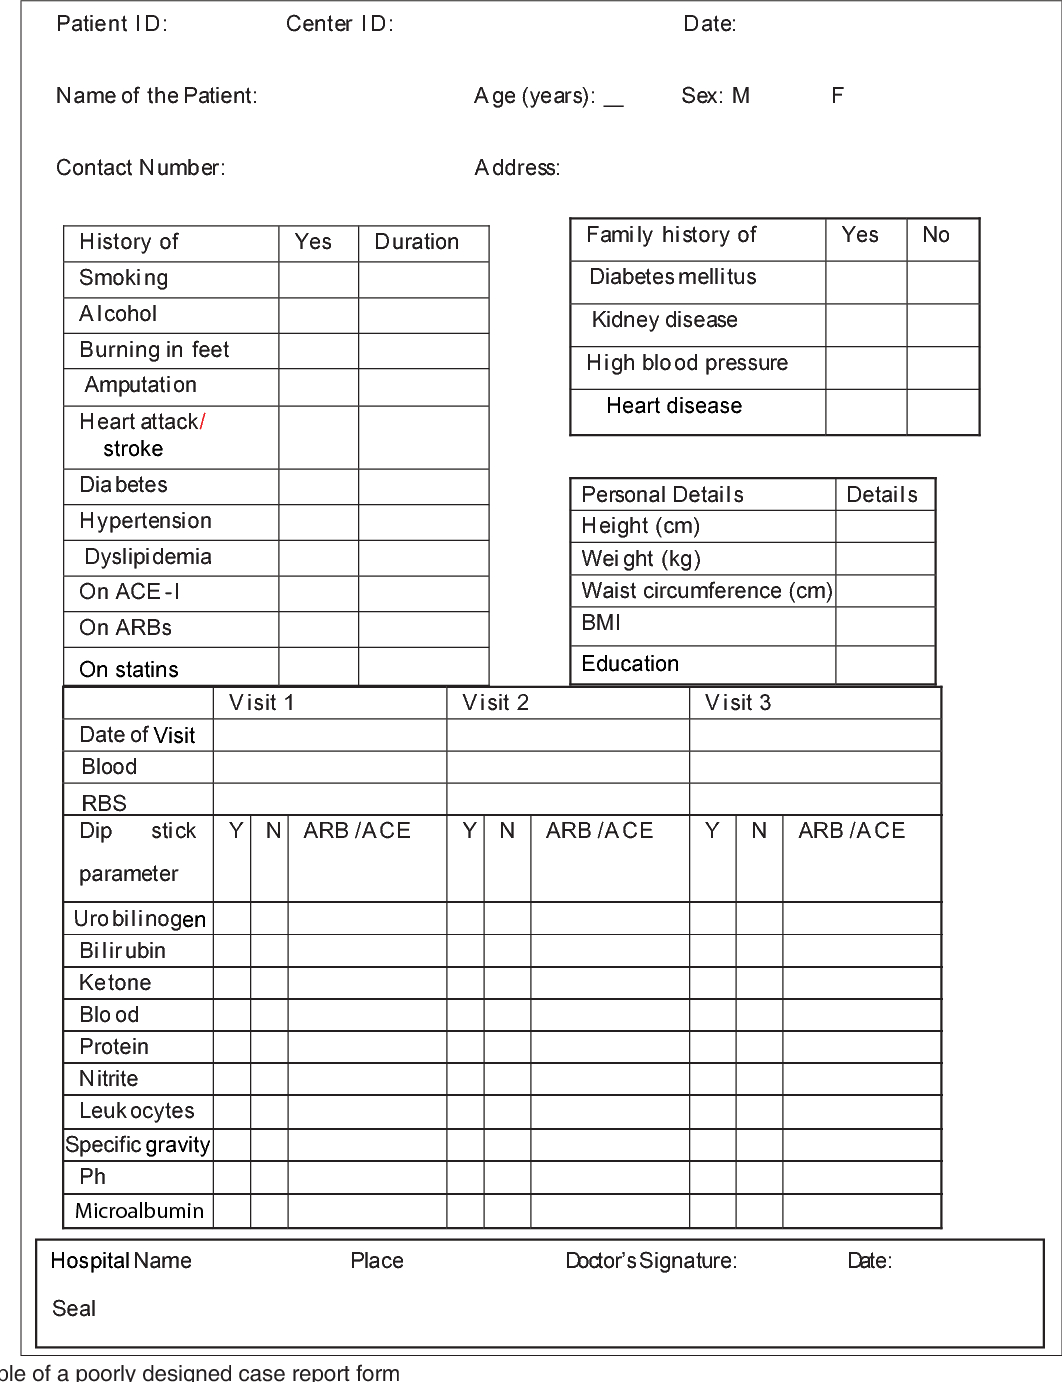 Basics Of Case Report Form Designing In Clinical Research Intended For Case Report Form Template Clinical Trials